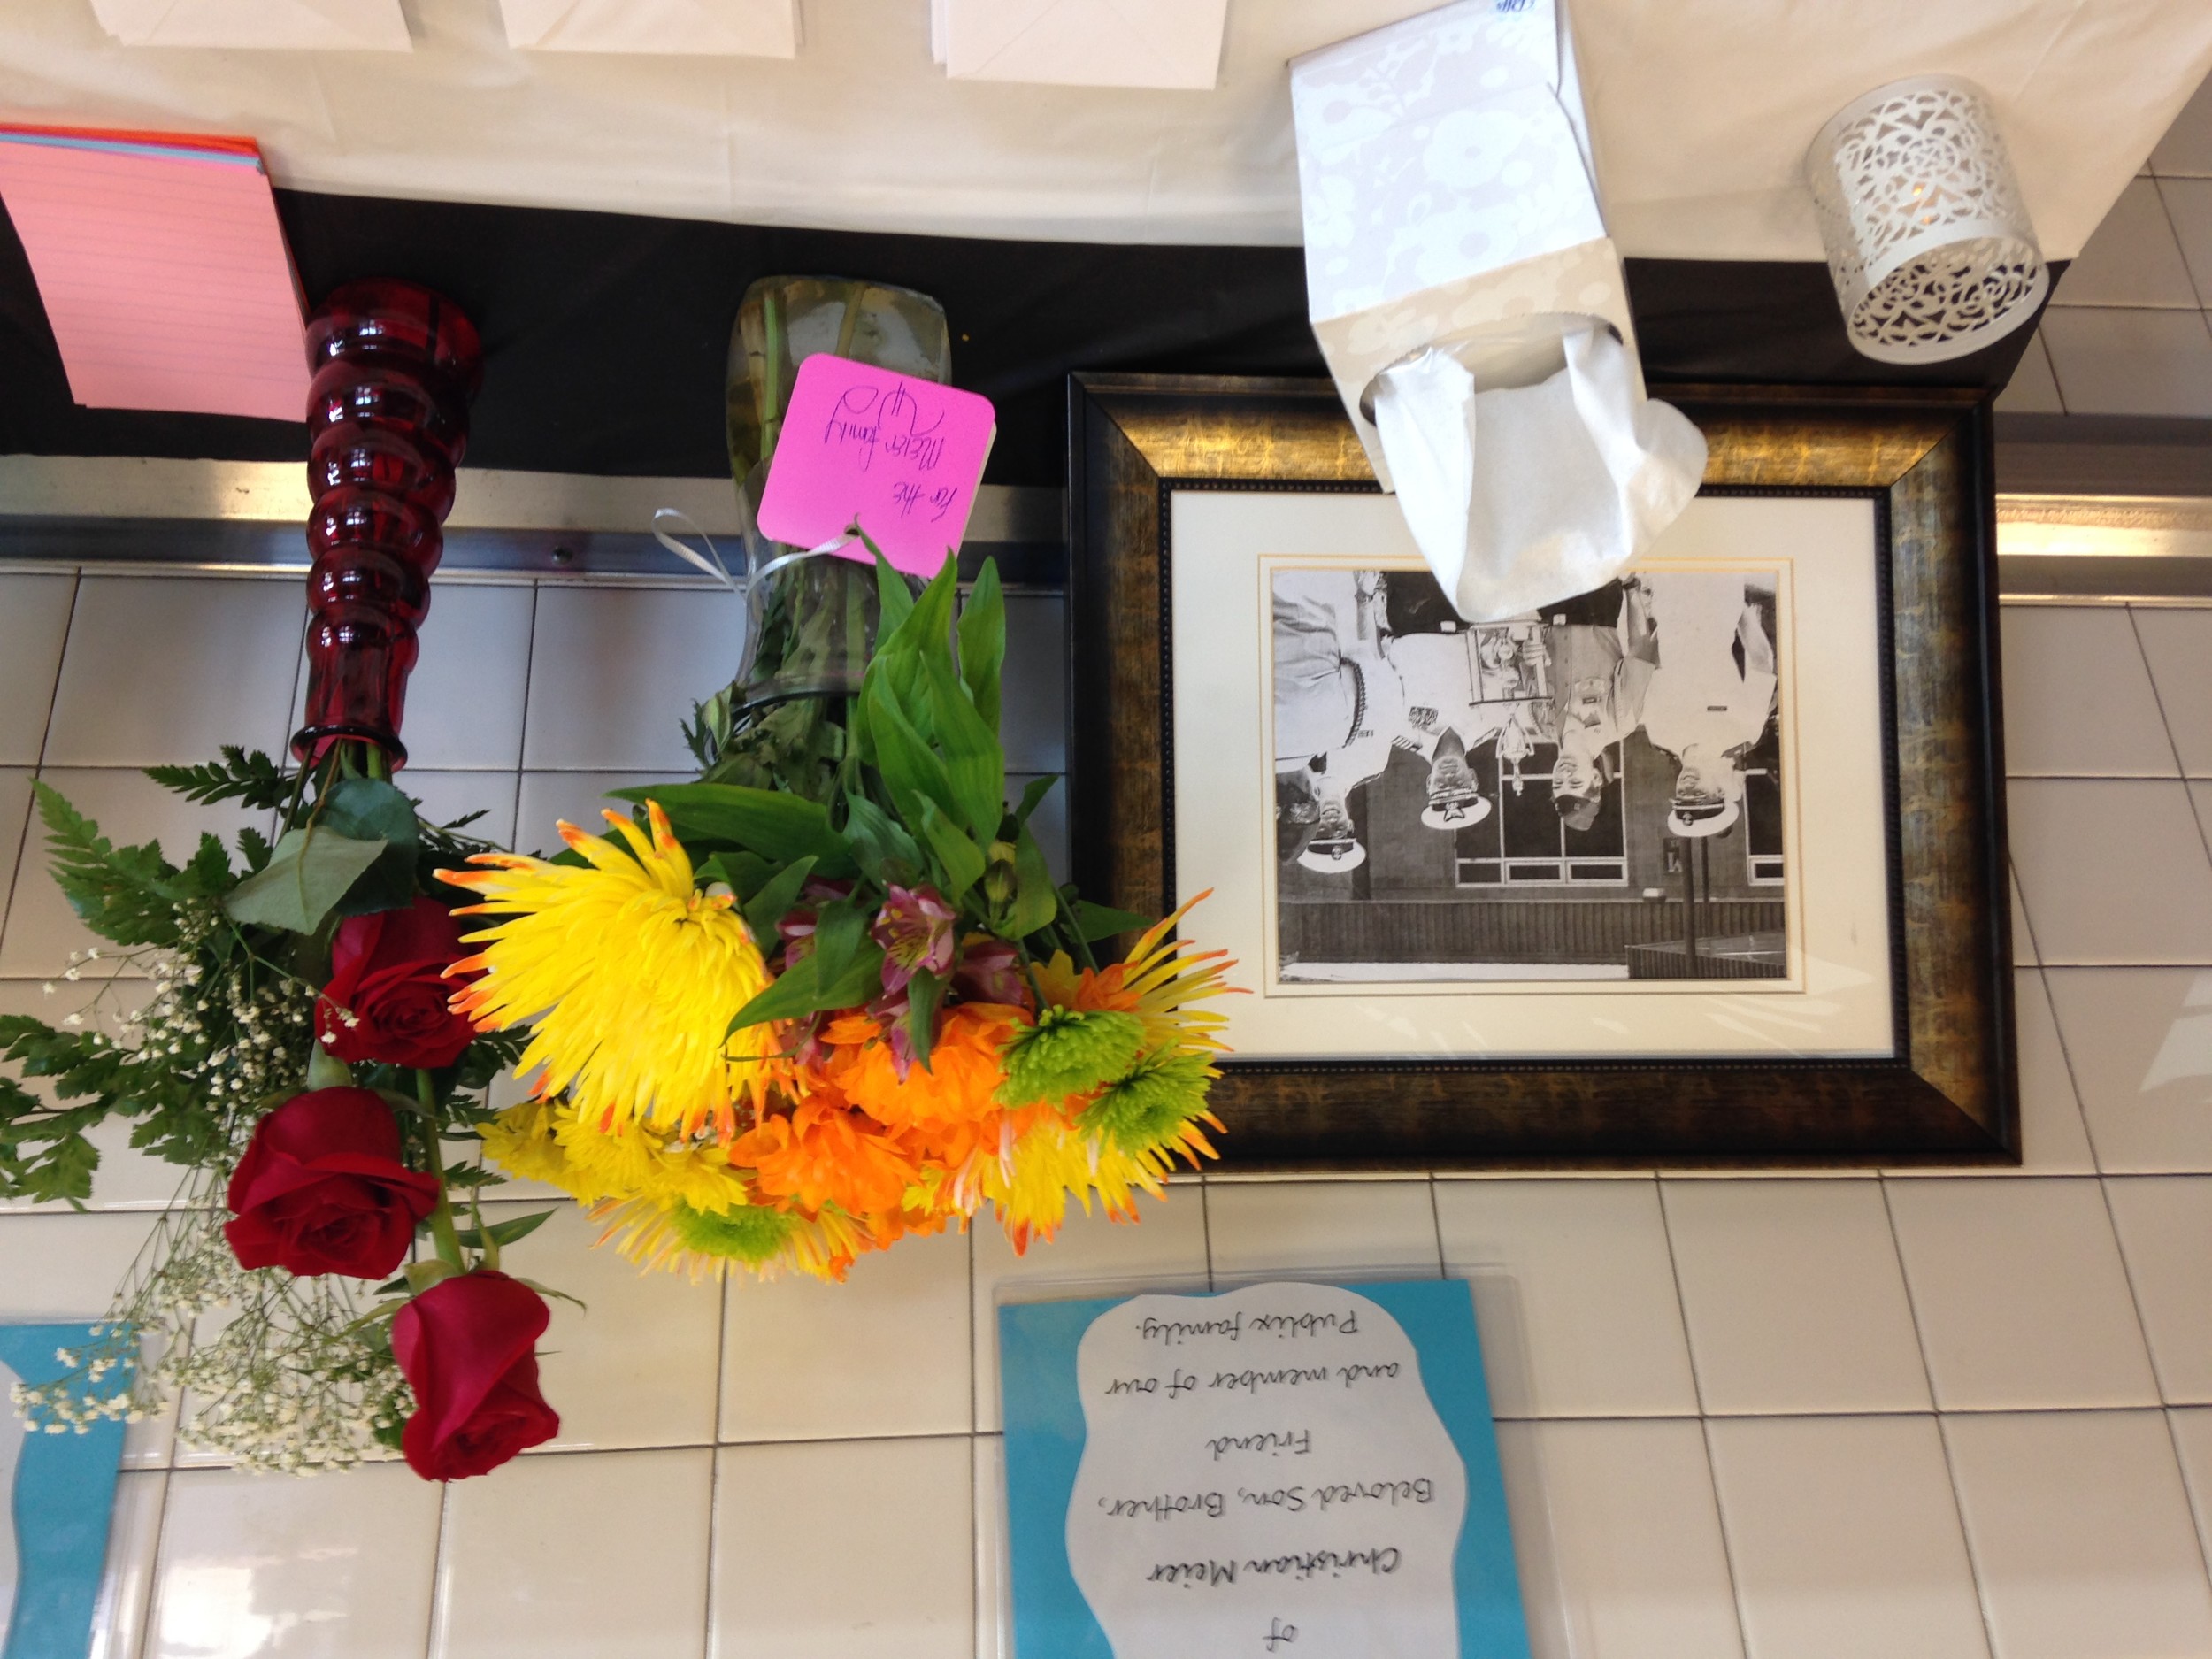 A table where local residents could write cards and notes to the Meier family was set up in Publix, where Christian was employed.